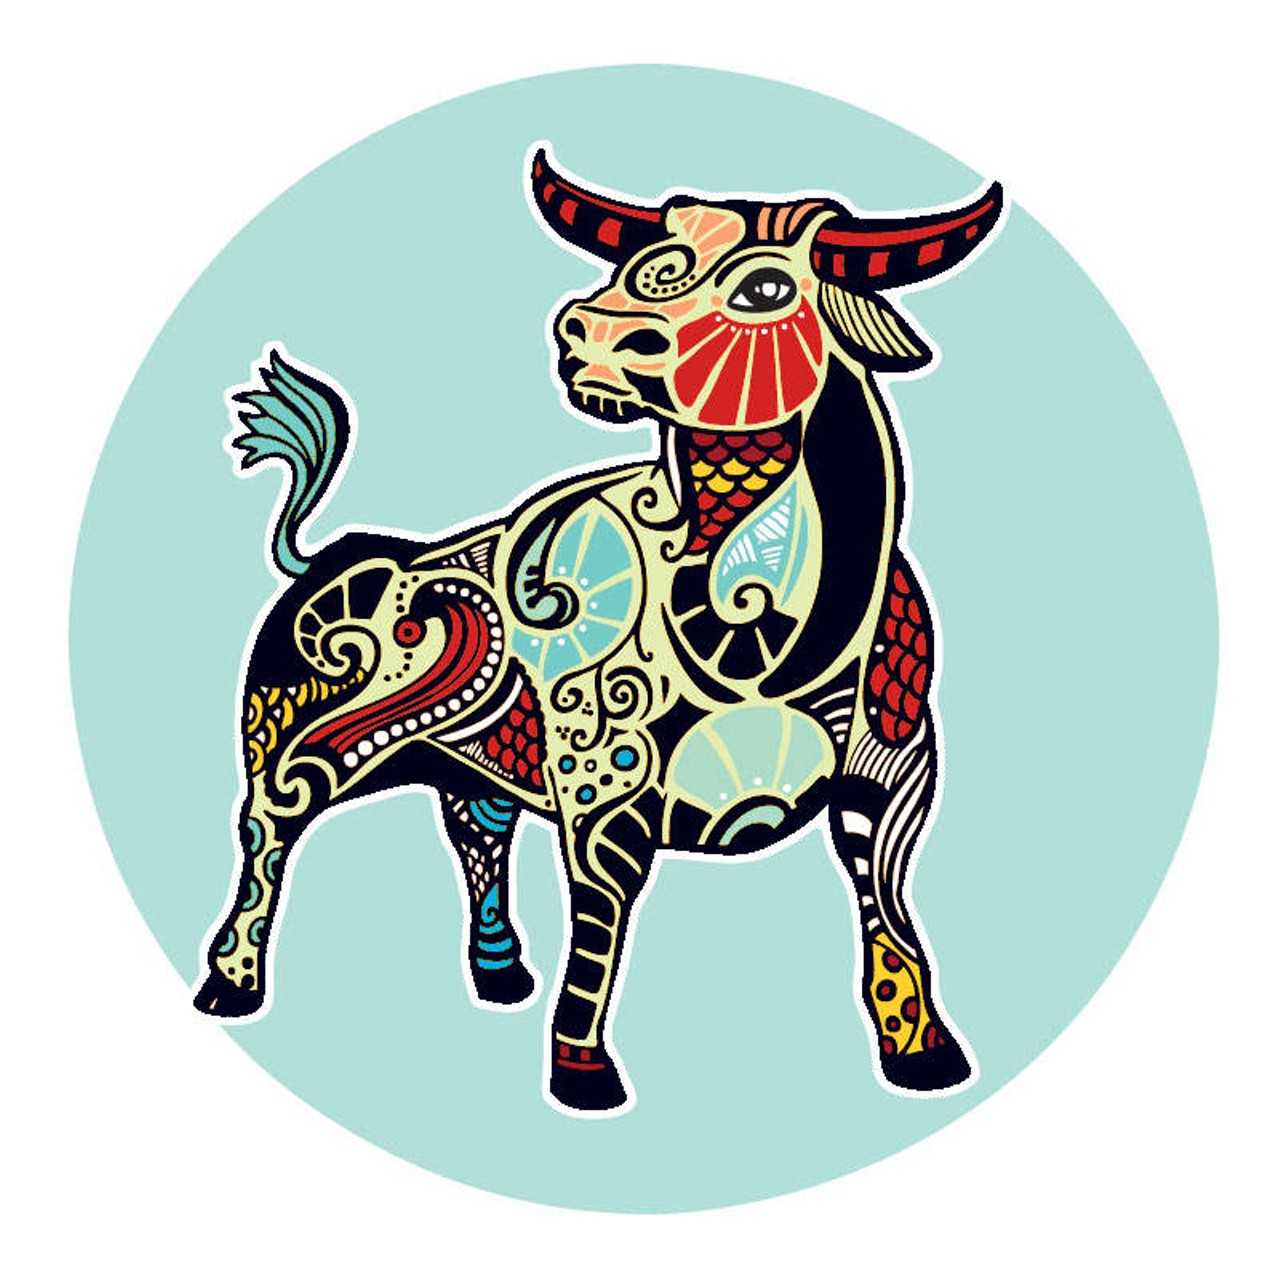 TAURUS: April 21 &#150; May 20
You can't deny this; whatever's going on, it's right in your face. So much of what you never expected is forcing you to come to terms with yourself. This feels good, bad, or confusing depending on where you're at. The need to be really flexible, and open enough to step out of your pictures and deal with the reality of your situation can't be over emphasized. This is the biggest change point of your life. To be too timid, or too stuck, or too angry about the things that aren't working won't do much but hold you back and keep you from reinventing your life.